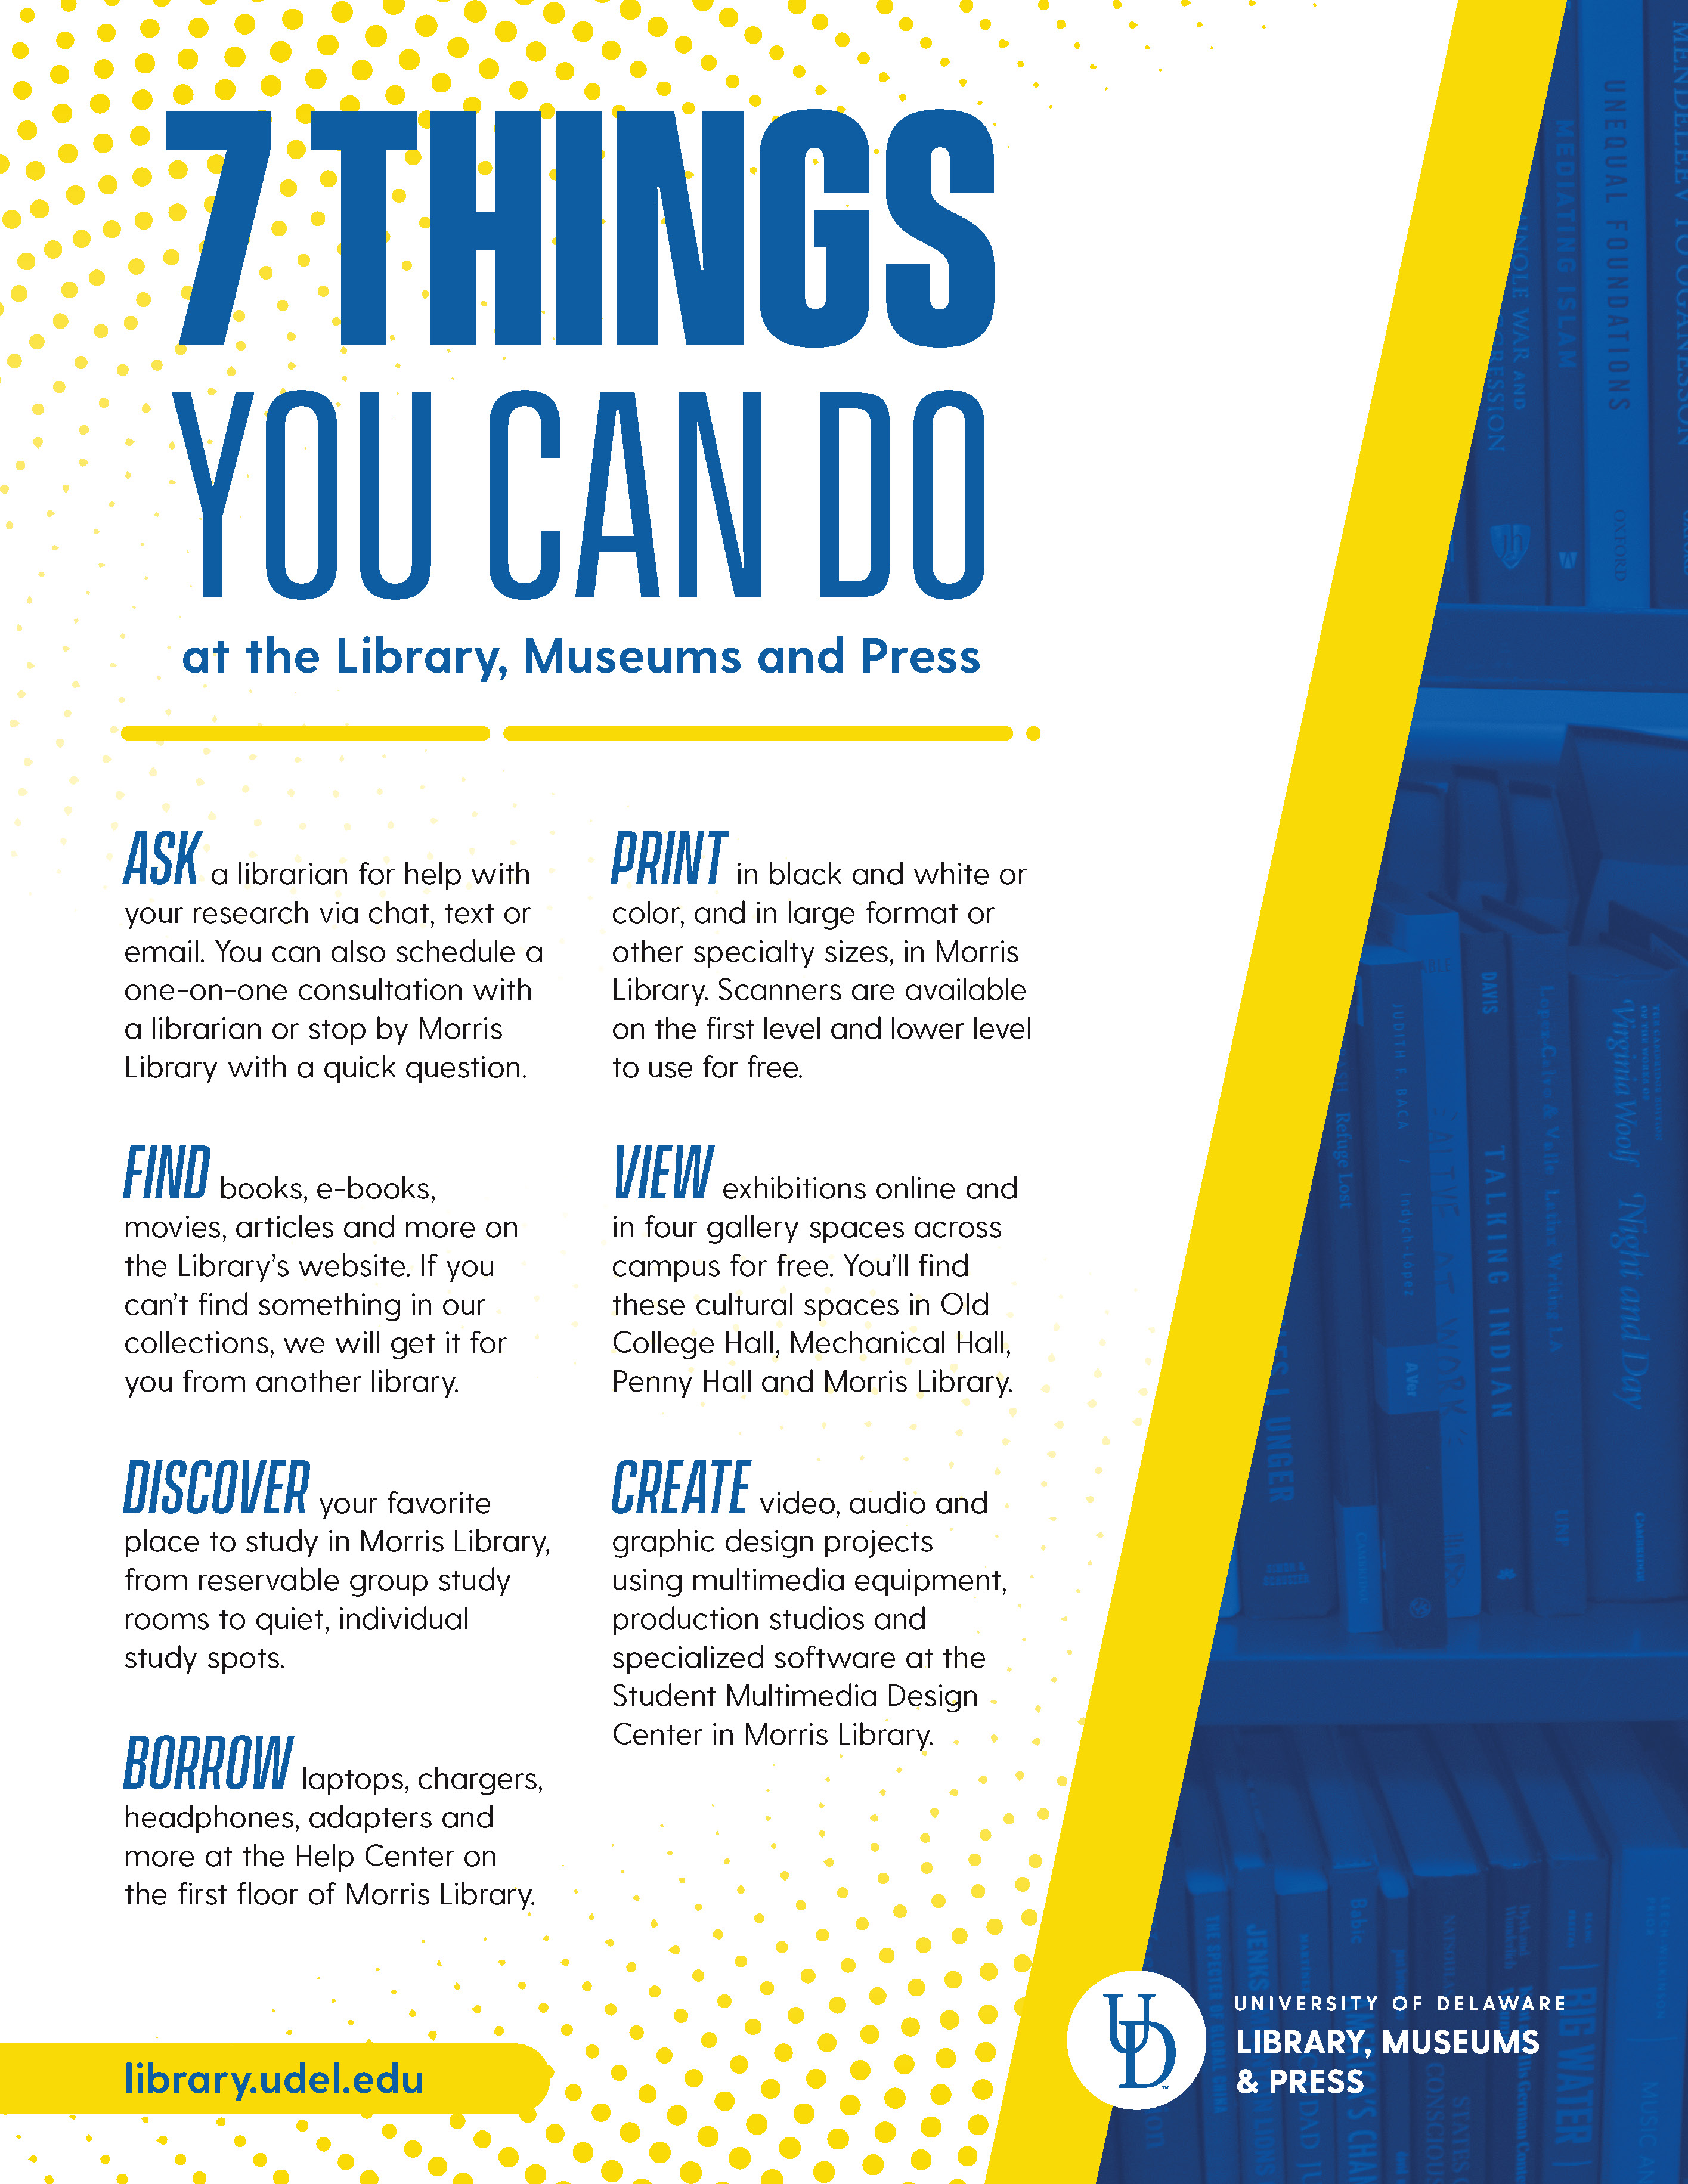 7 Things student flyer